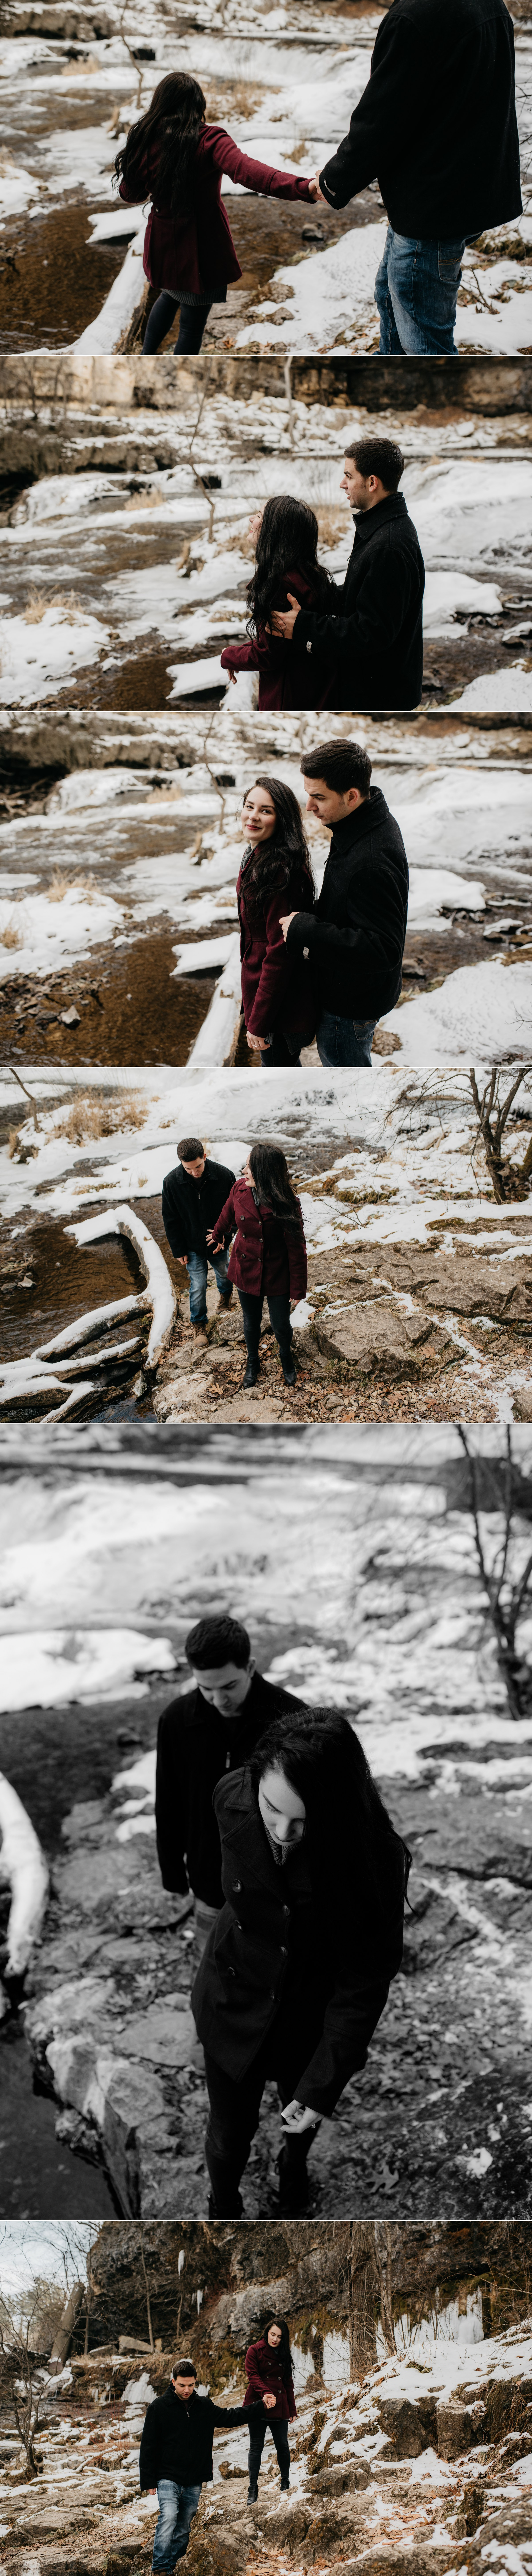 austin-minneapolis-elopement-photographer-willow-river-spain-france-costa-rica-best-family-affordable_0028.jpg